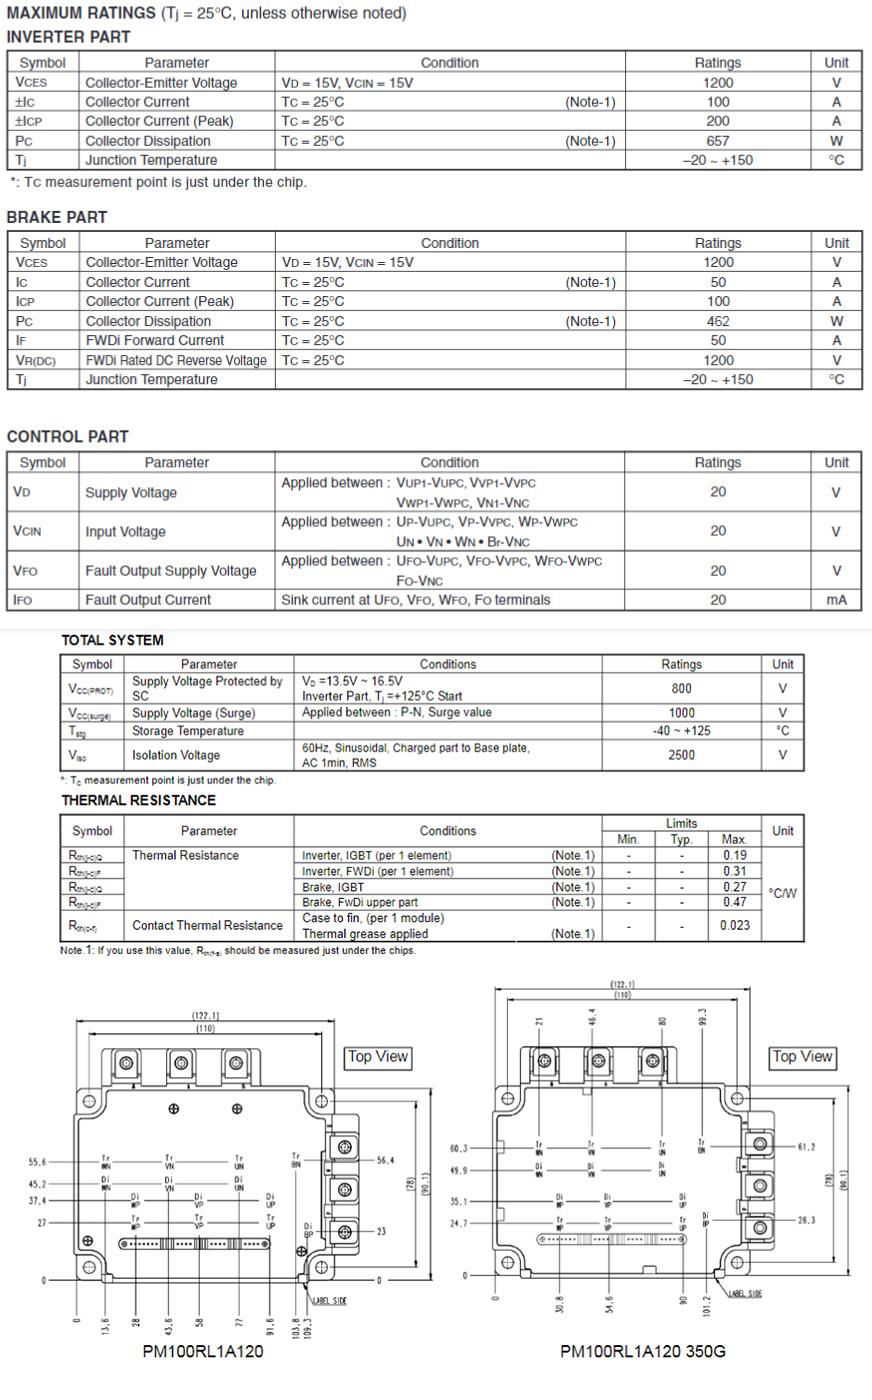 PM100RL1A120 Datasheet and Physical parameters